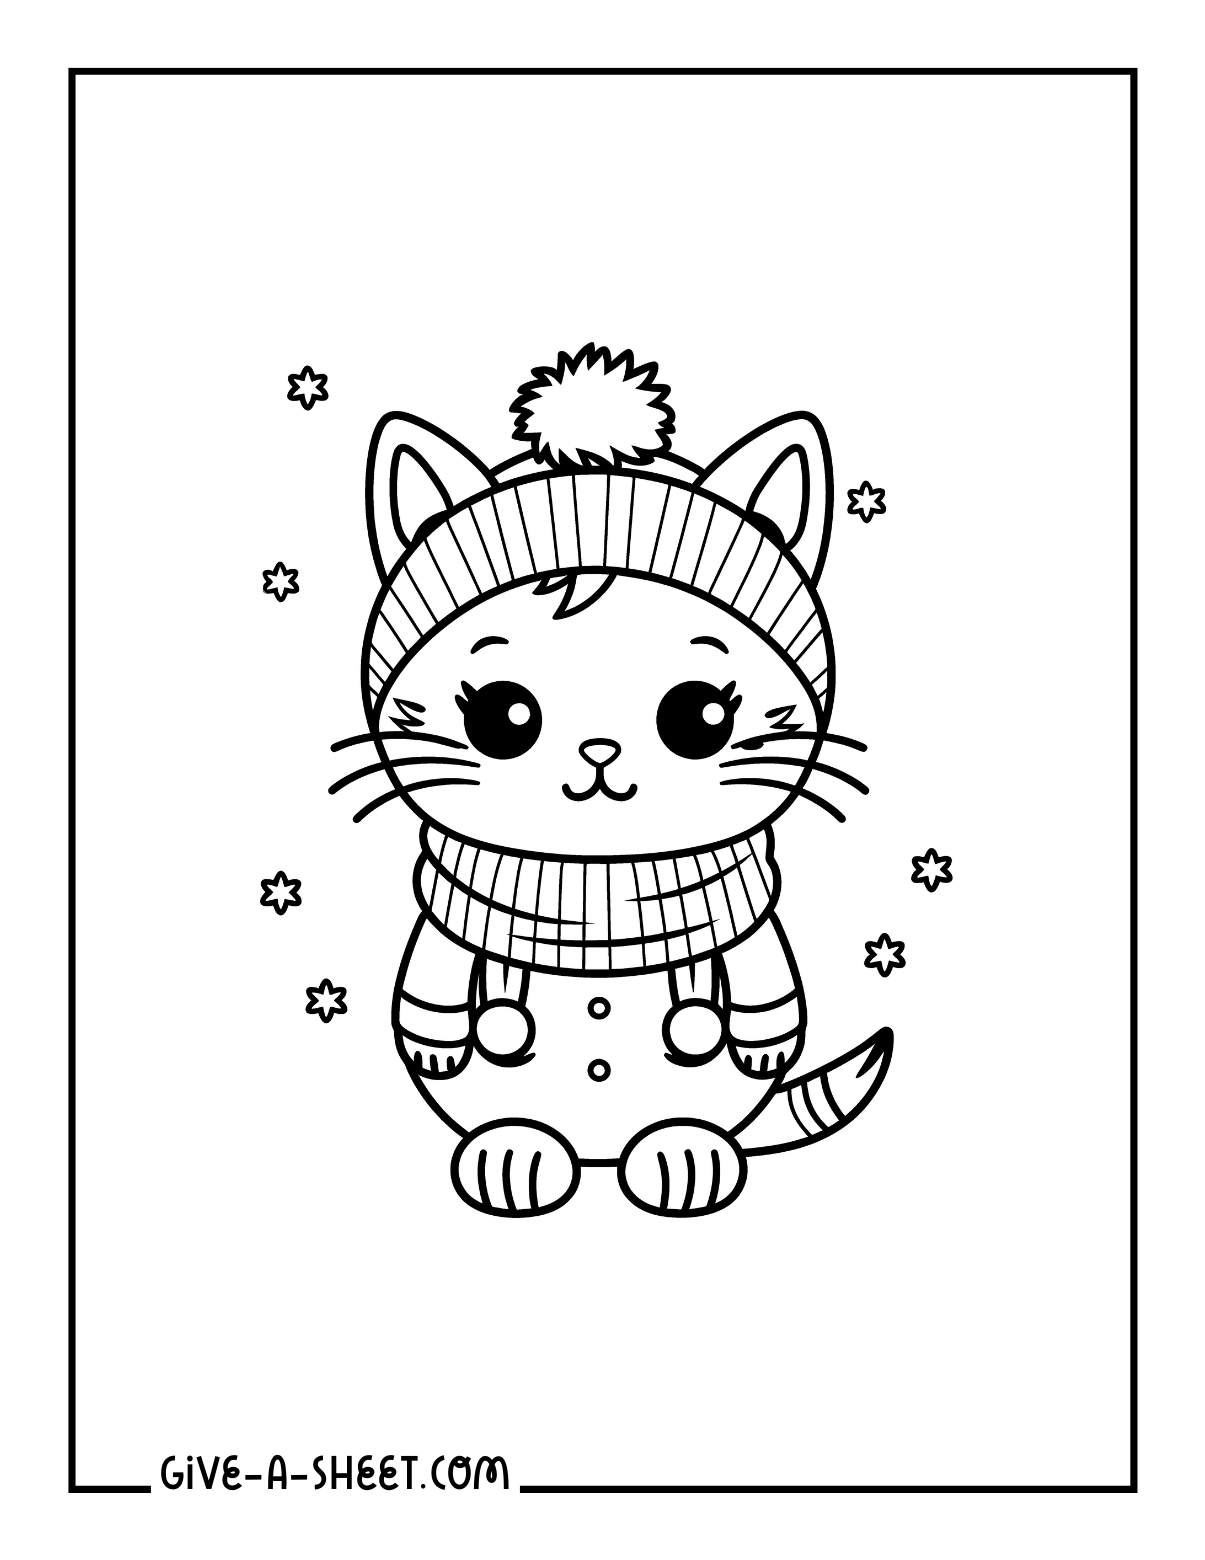 Kawaii cat wearing warm accessory for winter coloring sheets.